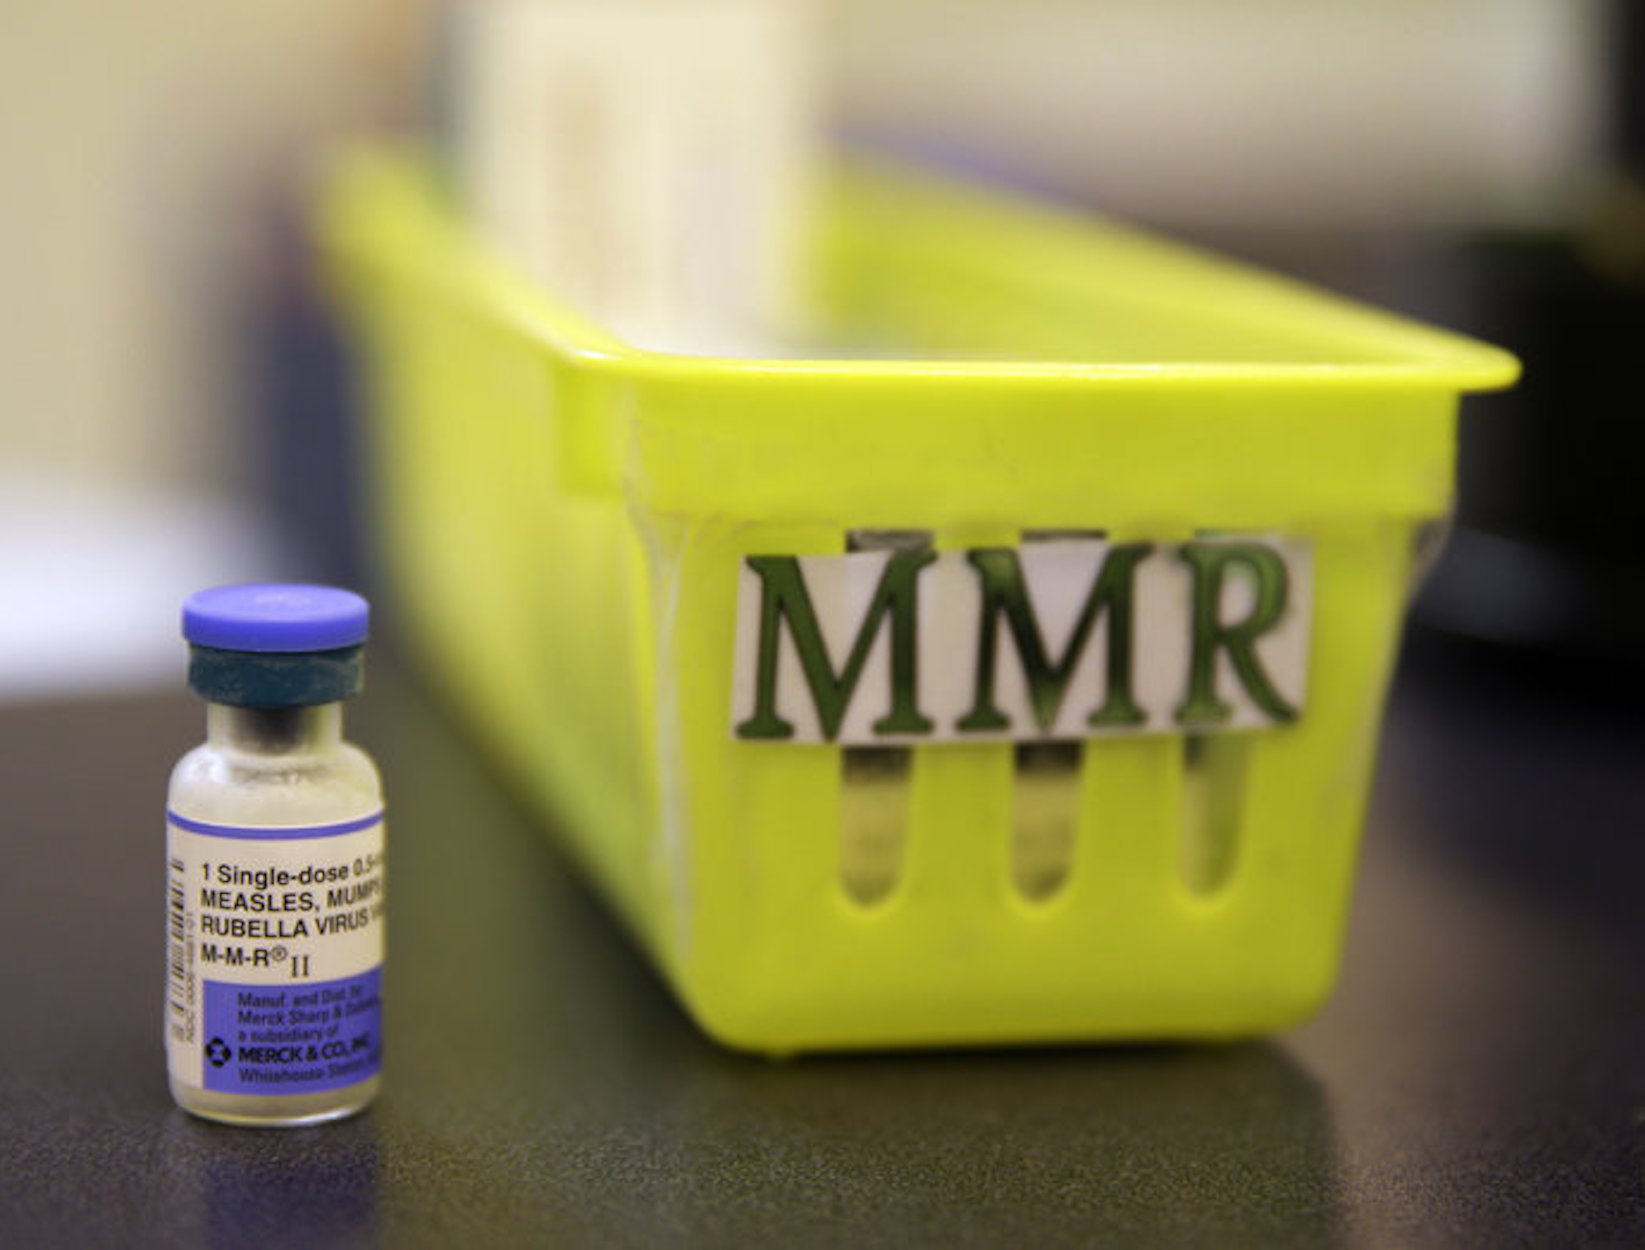 Measles Shots Aren't Just for Kids: Many Adults Could Use a Booster Too